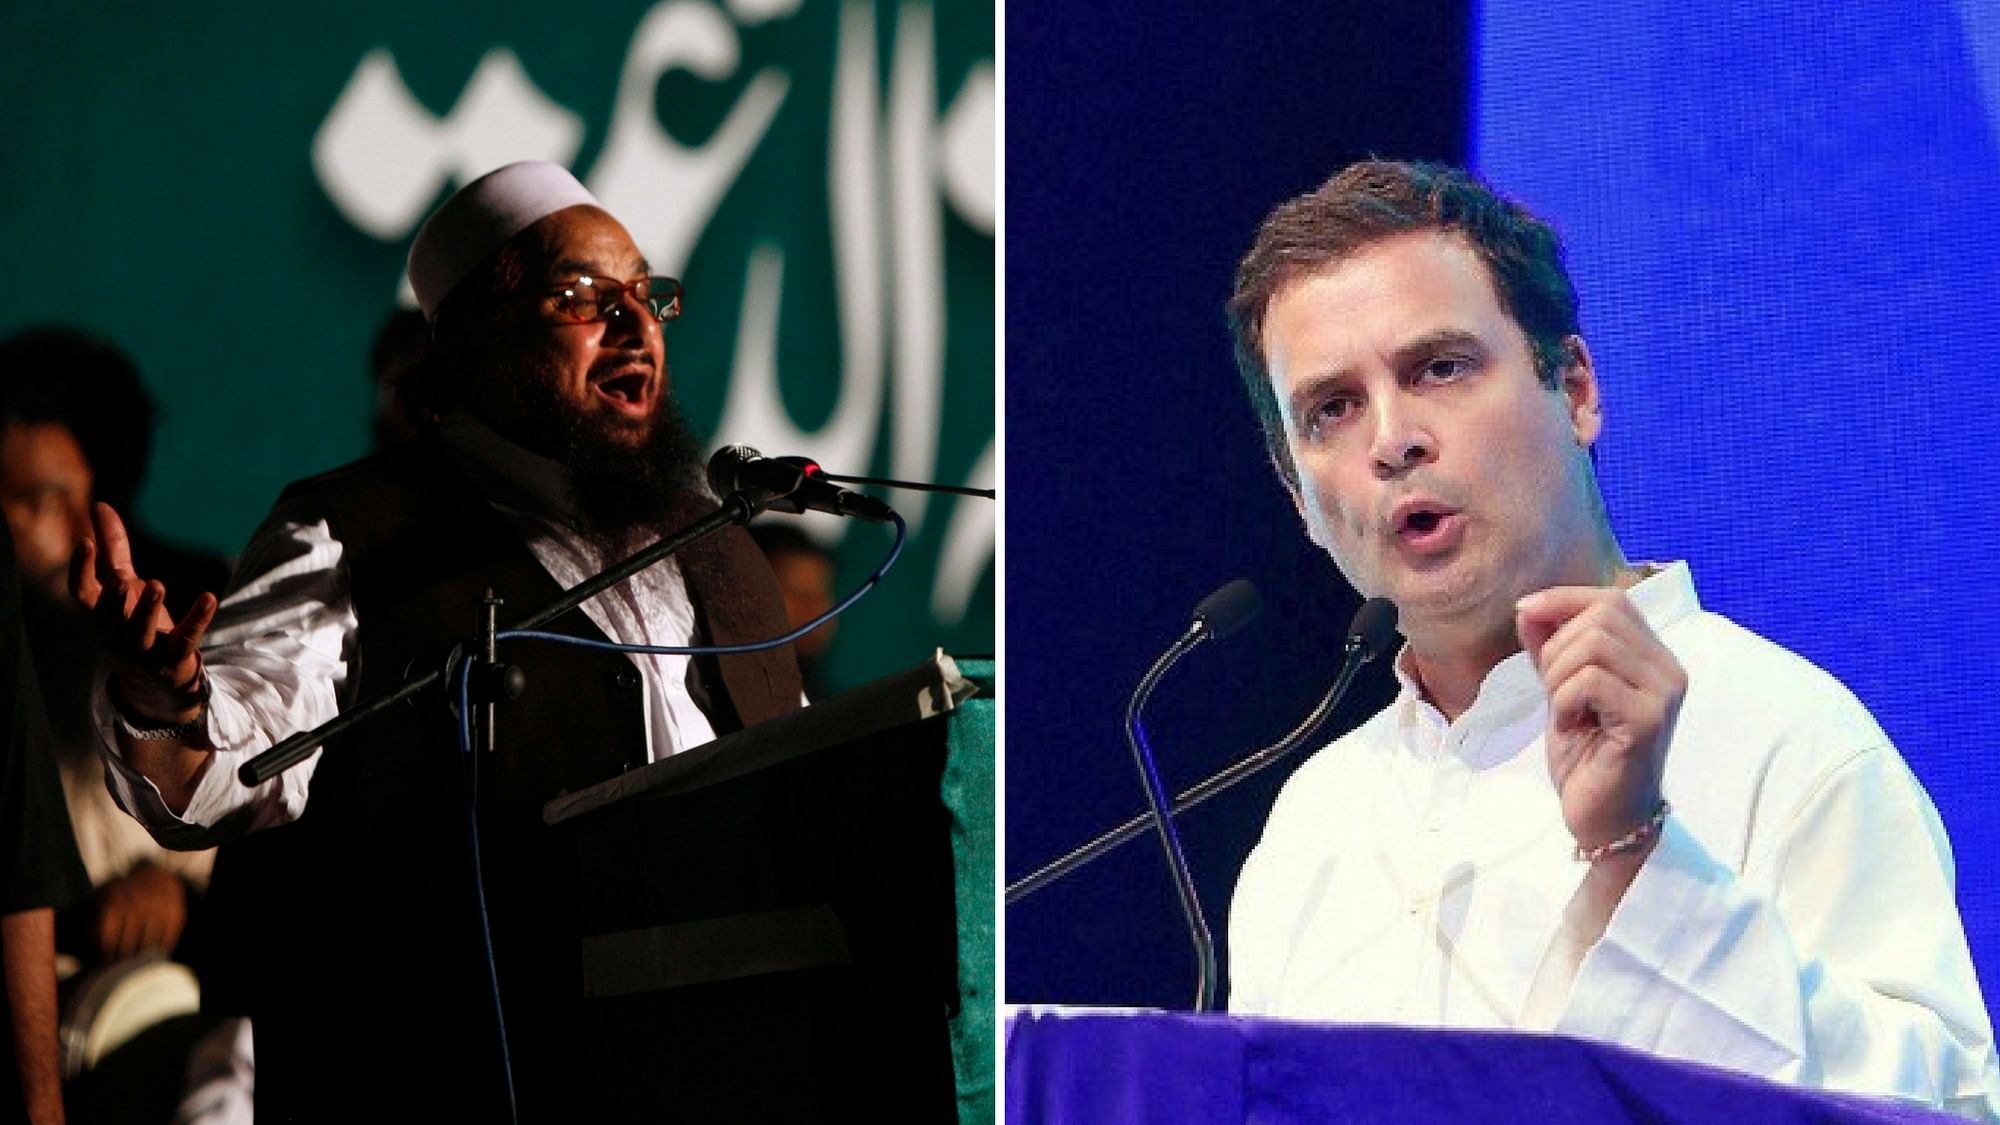 On Friday, Lashkar-e-Taiba (LeT) founder Hafiz Saeed, accused of masterminding the 26/11 Mumbai massacre in 2008, was freed after 10 months of house-arrest in Pakistan. Rahul Gandhi tweeted to PM Modi.